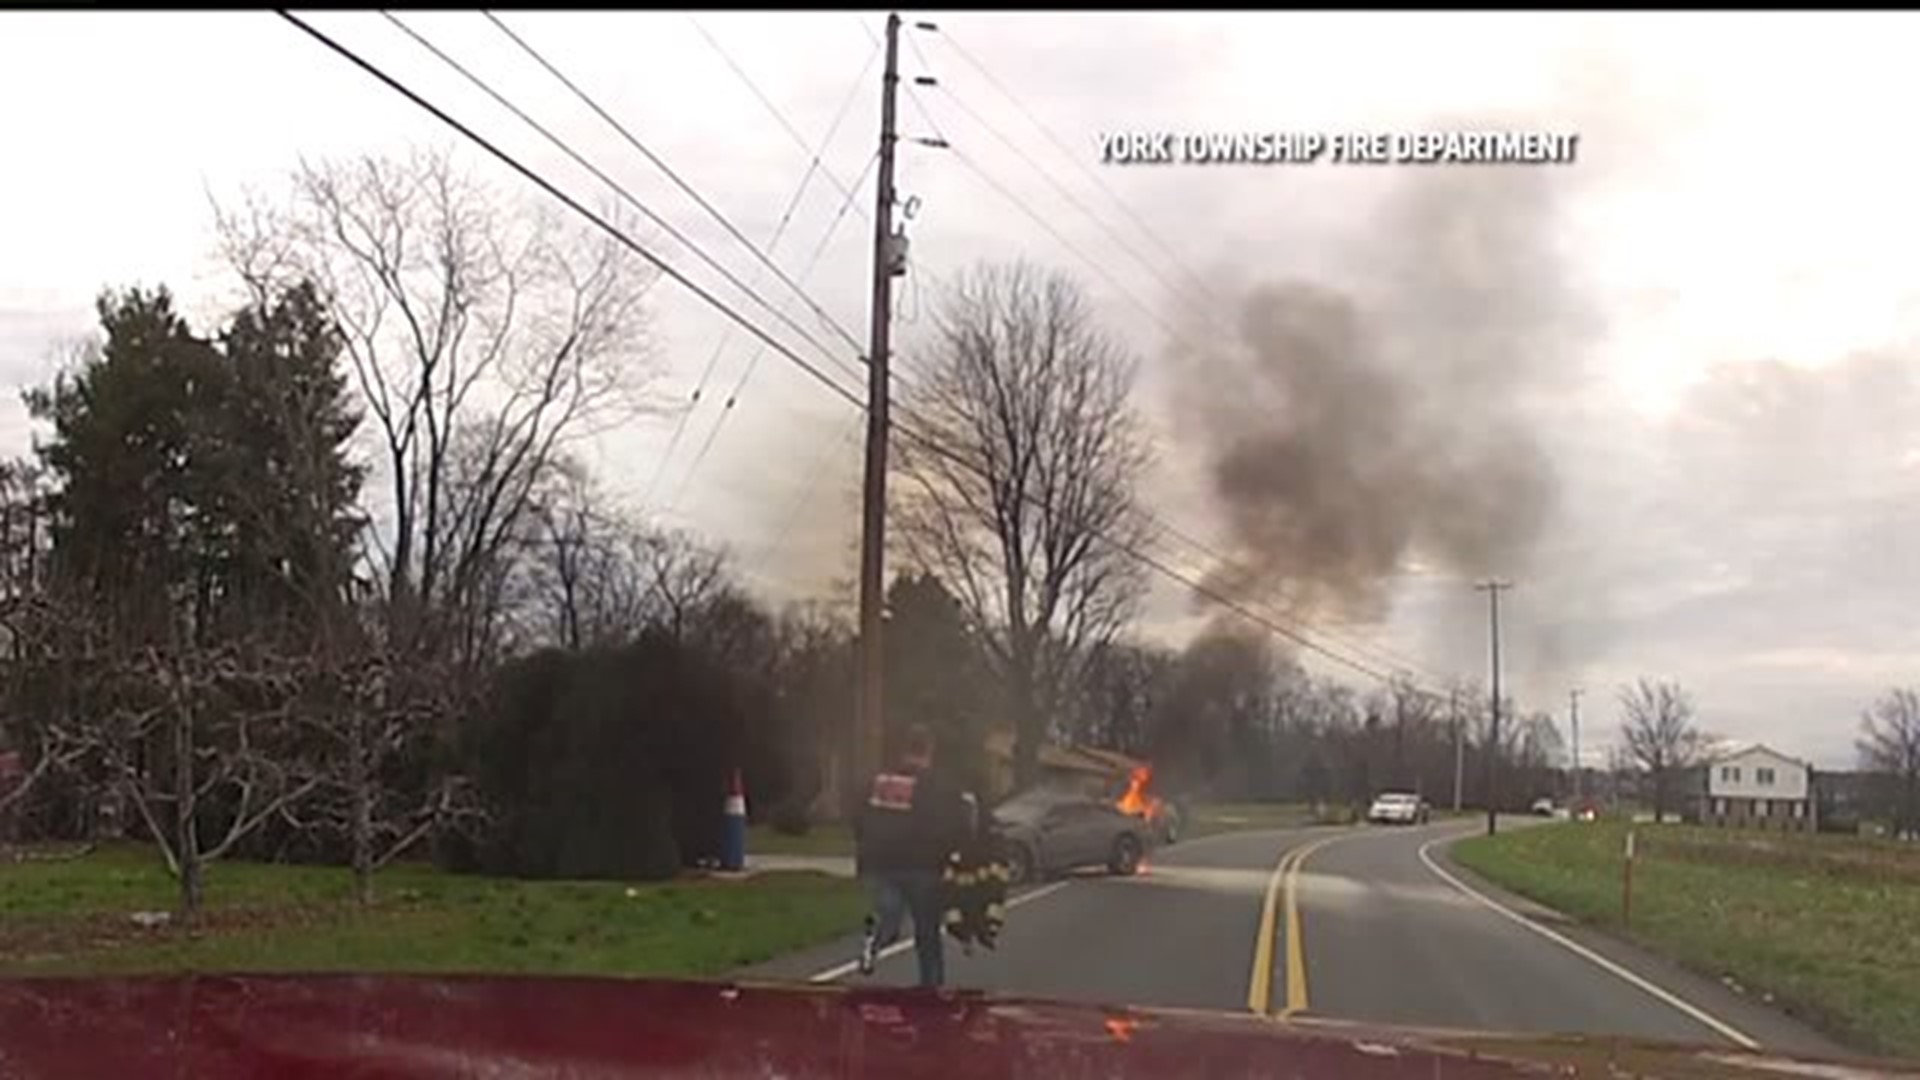 York Township Fire Department chief saves man from burning